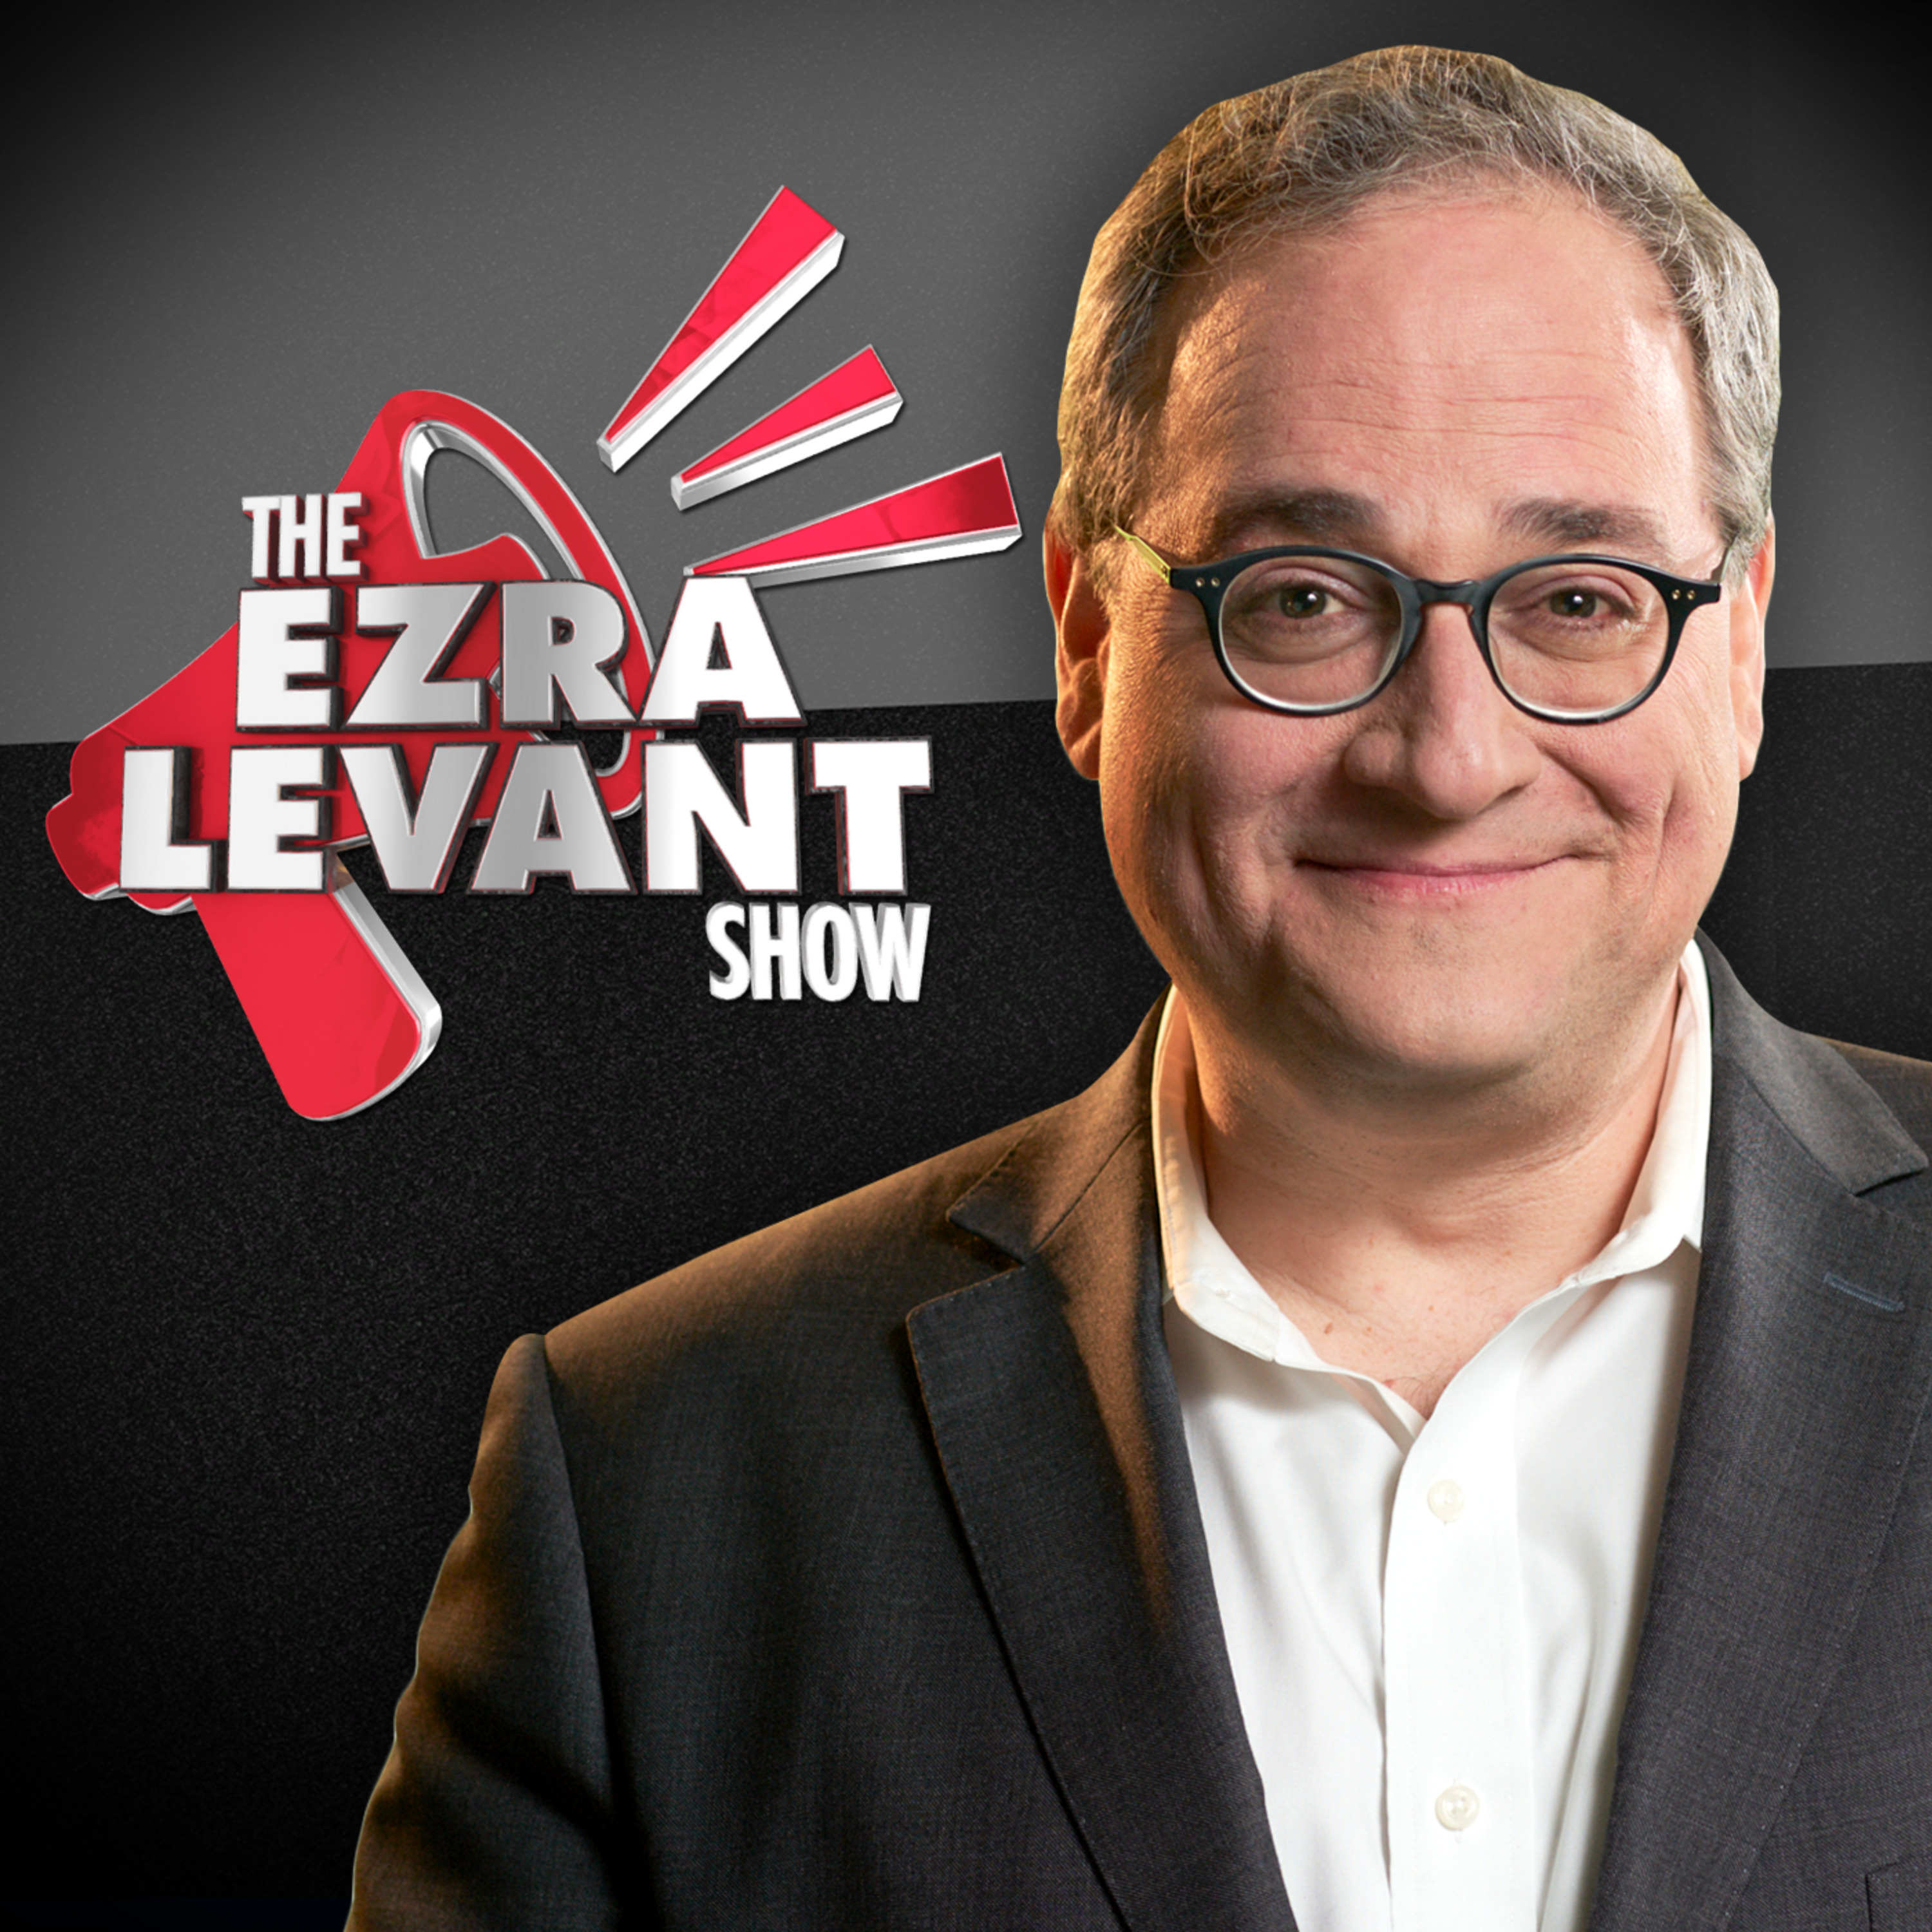 EZRA LEVANT | Is Canada broken? Debating the nation's state with Manny Montenegrino